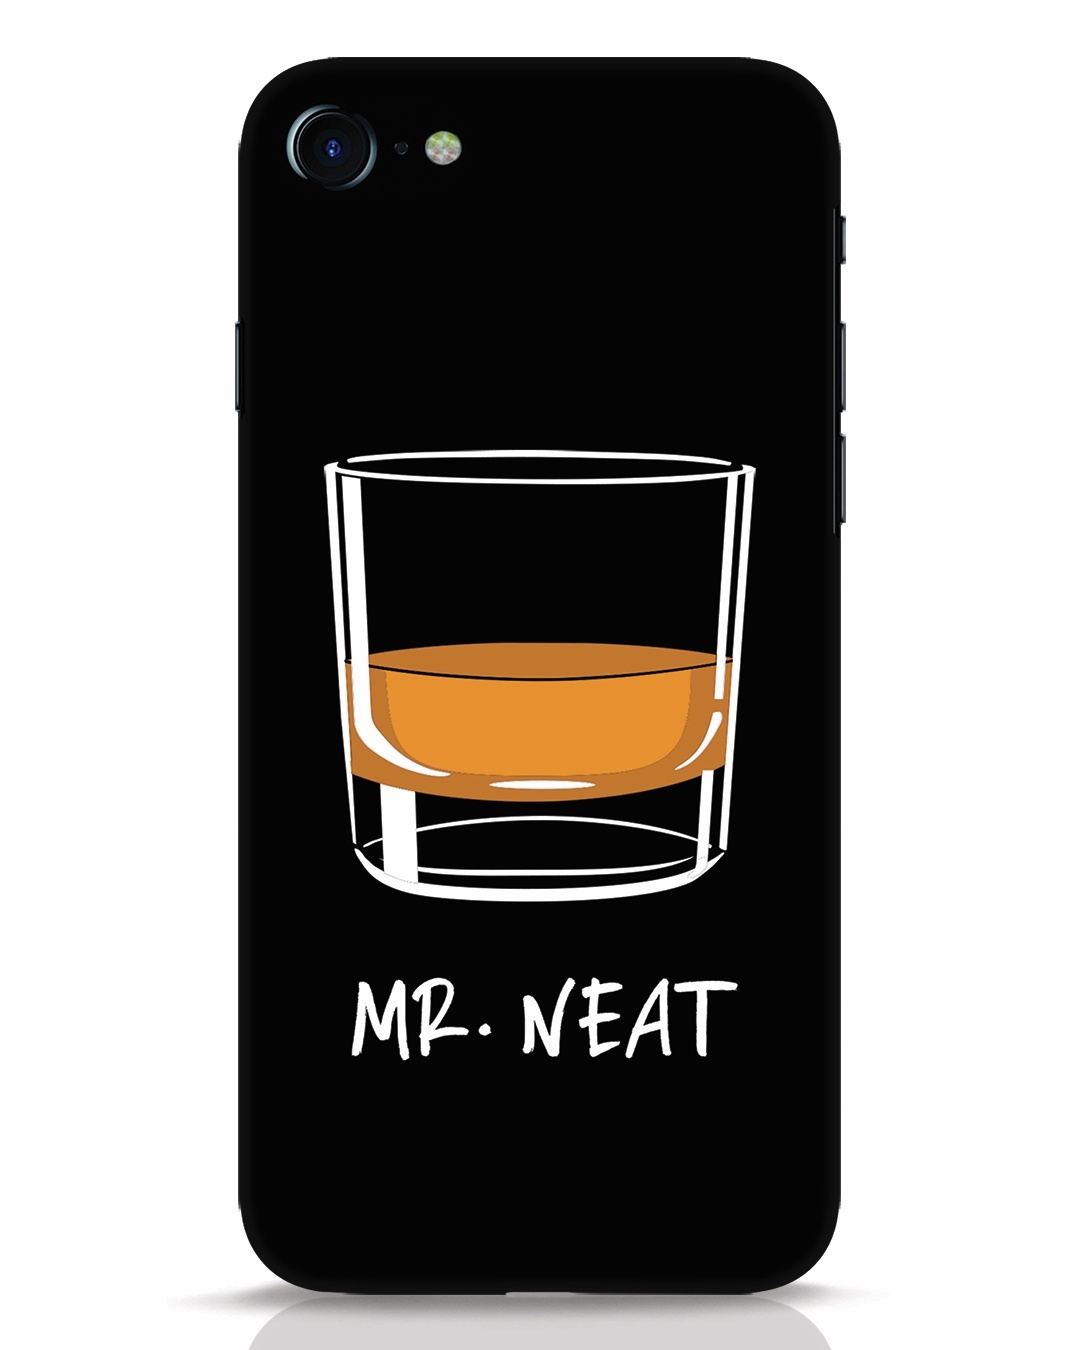 Mr.neat iPhone 7 Mobile Cover iPhone 7 Mobile Covers Bewakoof.com